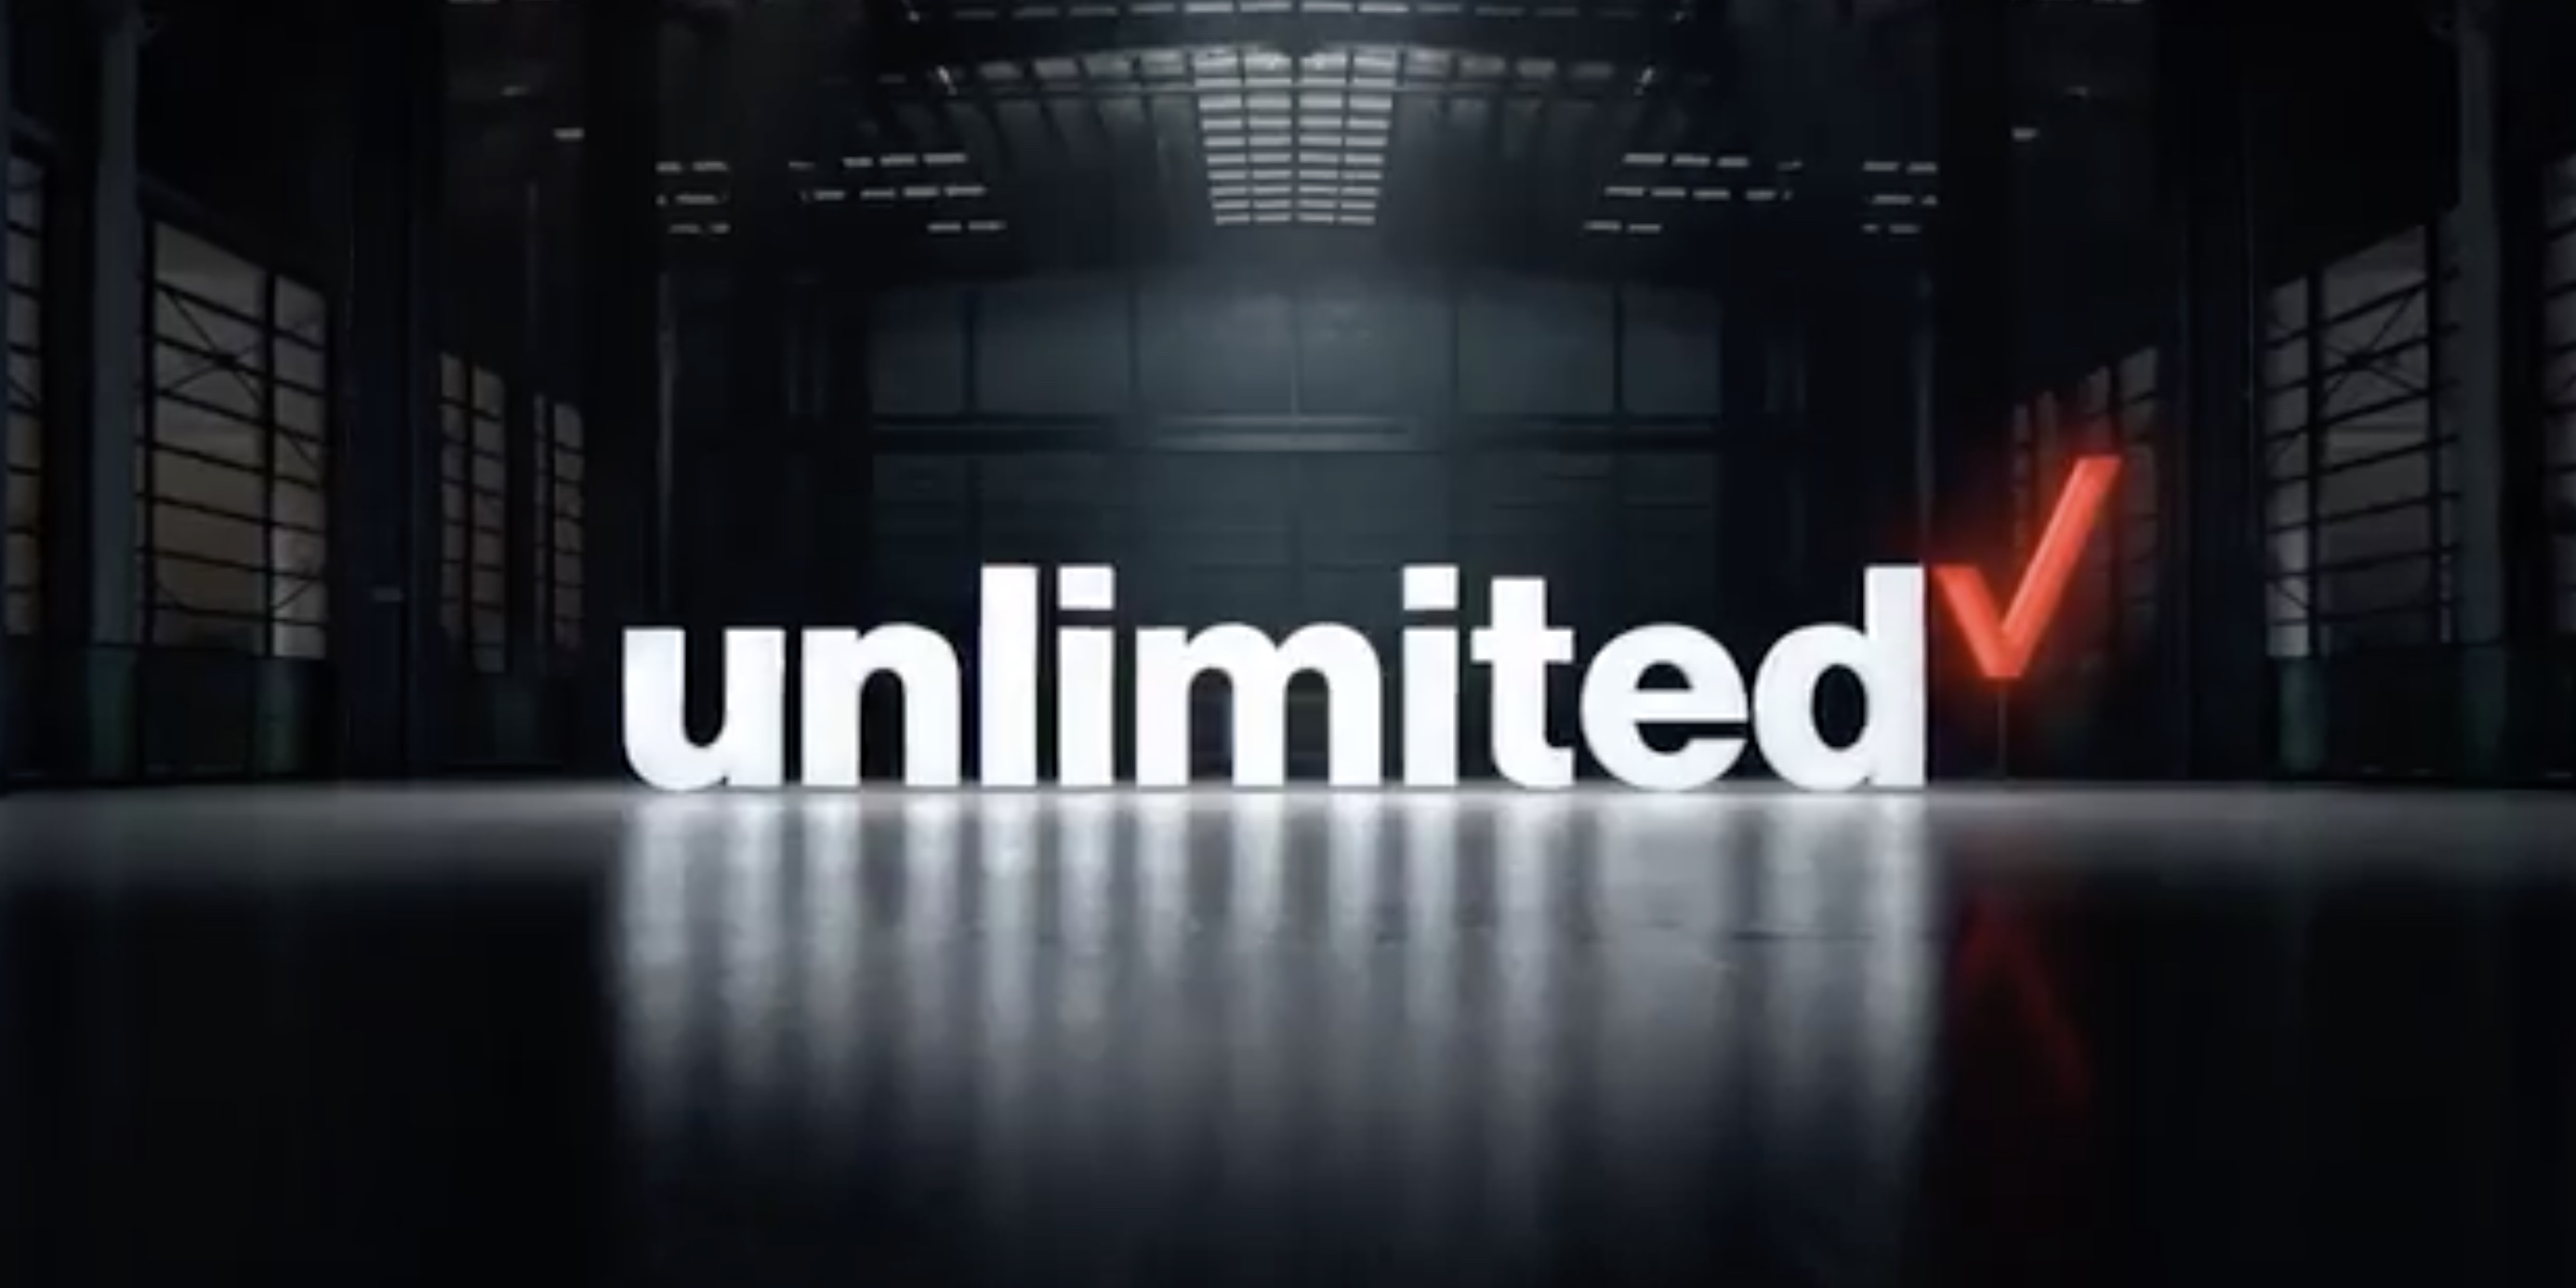 Thoughts - Verizon Brings Back "Unlimited"